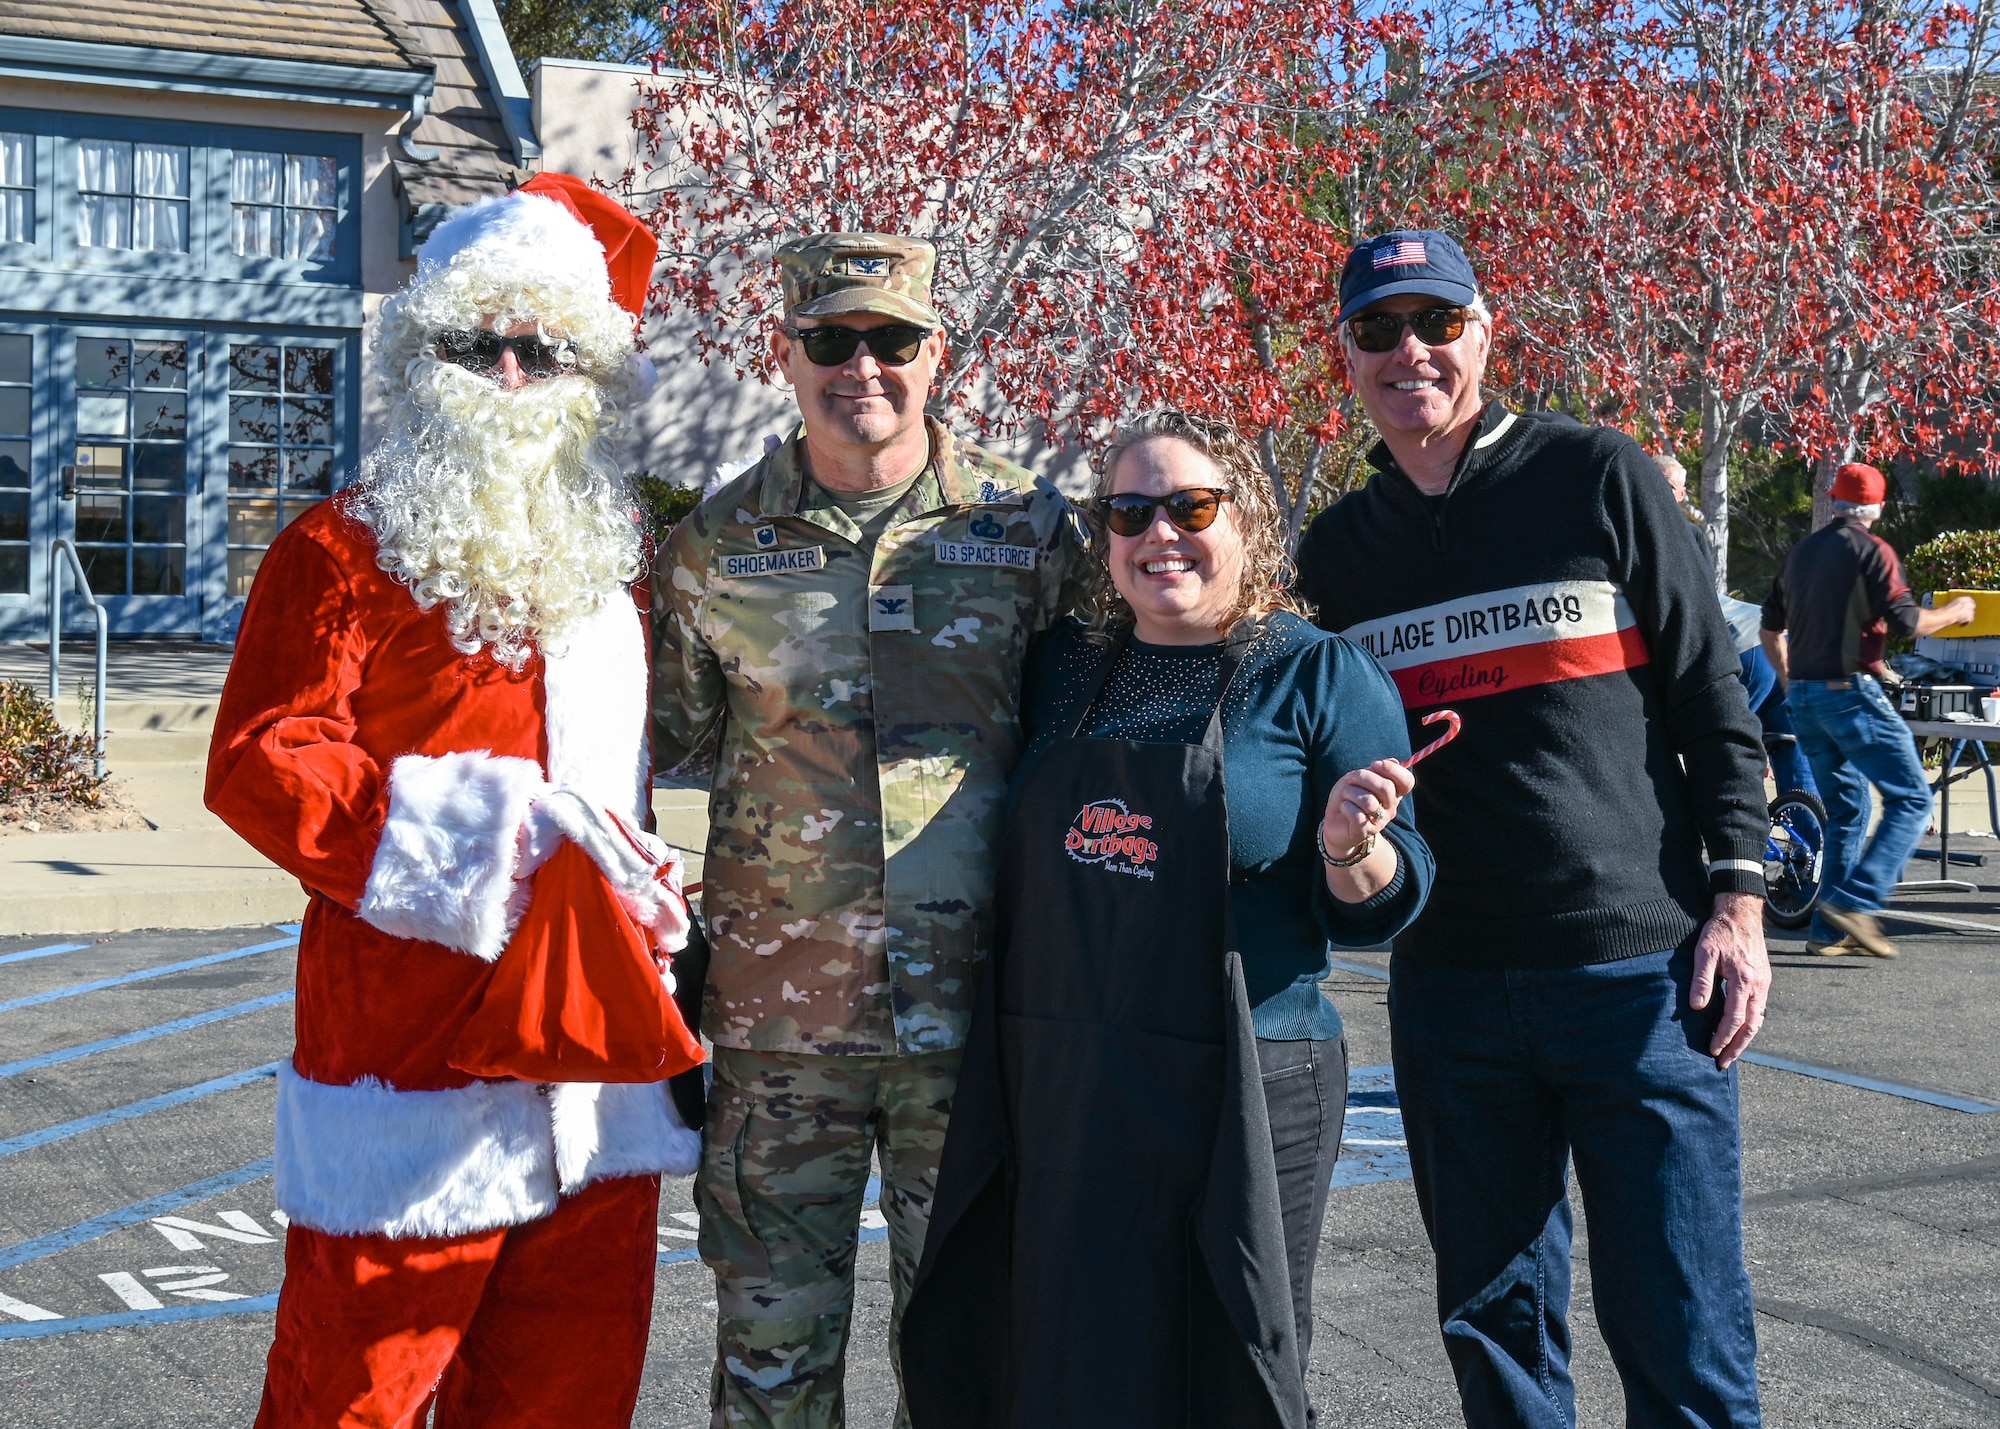 Space Launch Delta 30 commander (center), Mary Shoemaker, SLD 30 commander’s wife (center), Santa Claus, Worldwide cheer bringer (left), and Roger McConnell, Village Dirtbags lead coordinator for Vandenberg military families (right), pose for photo during the Holiday Bike Give away.